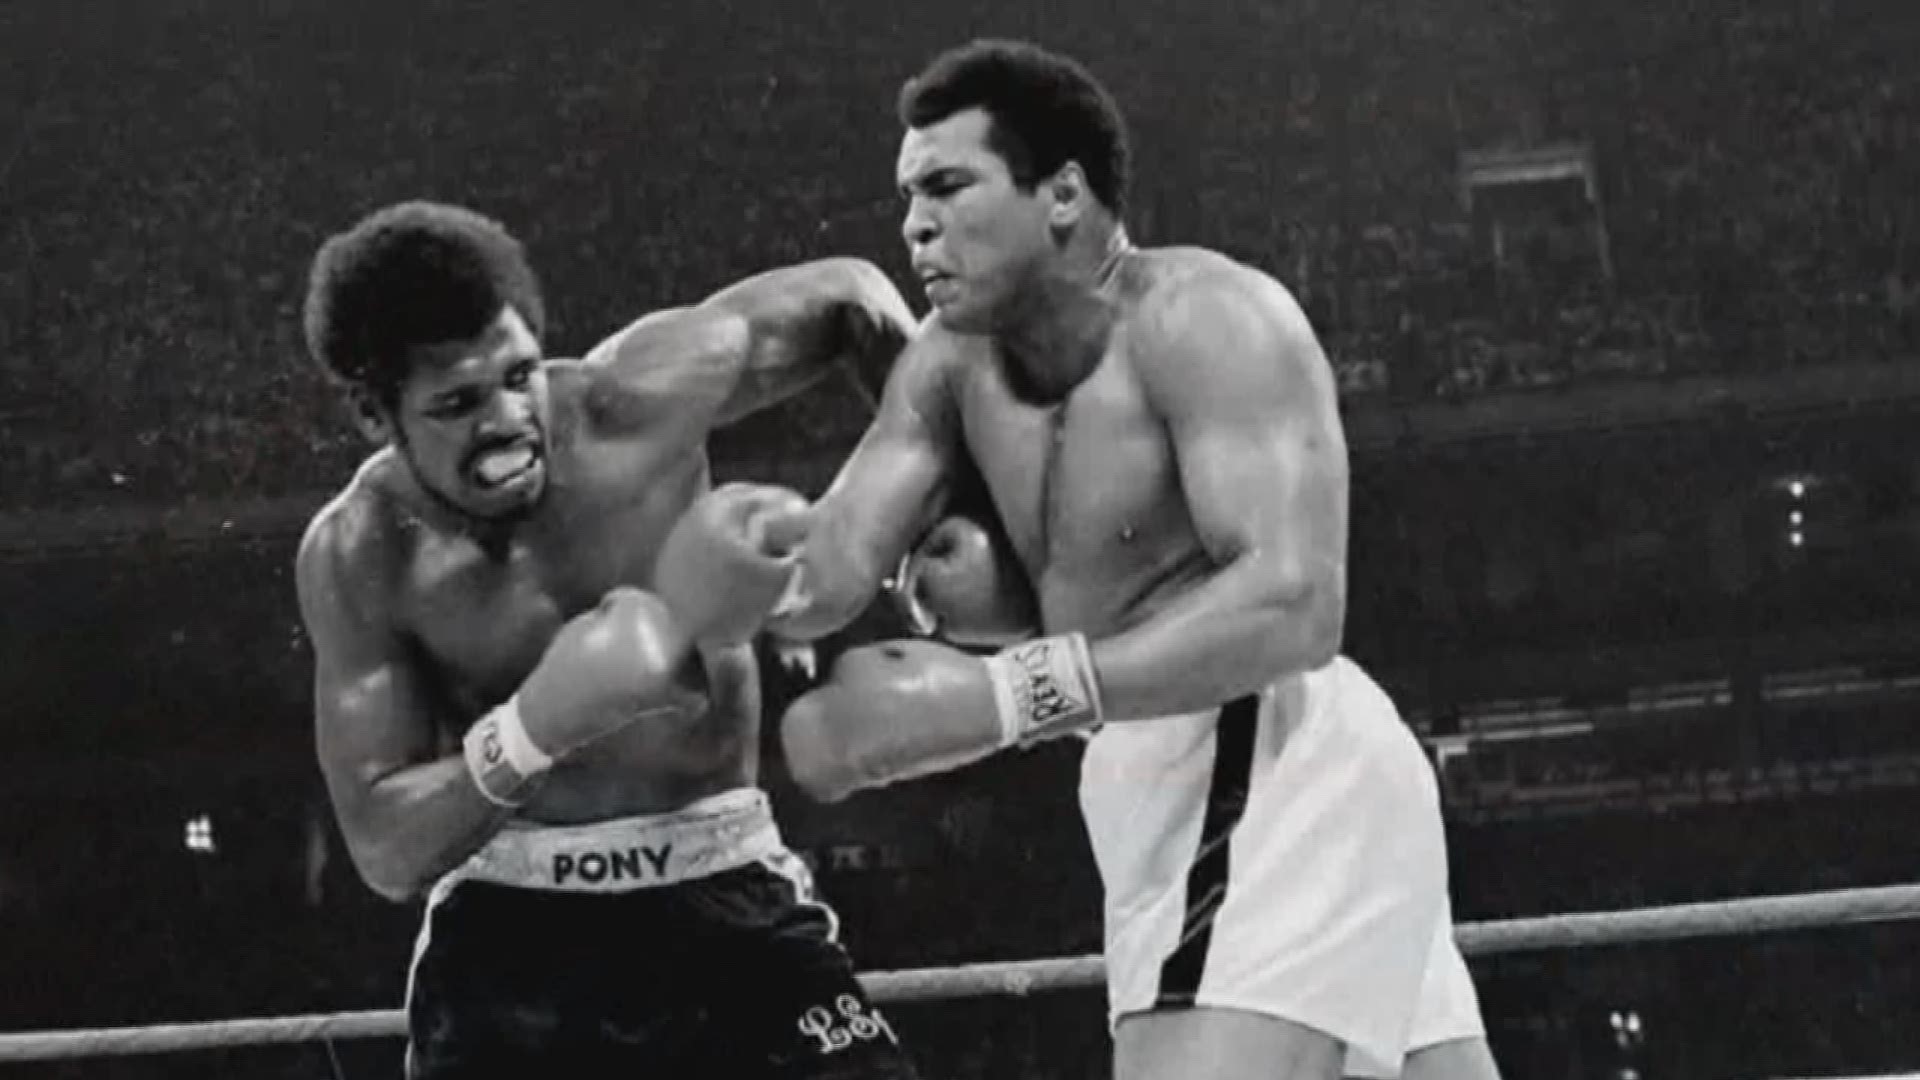 Memories of Muhammad Ali's fight against Leon Spinks in 1978 at the Superdome and of his training camp in Pennsylvania, which WWL-TV visited before the fight.